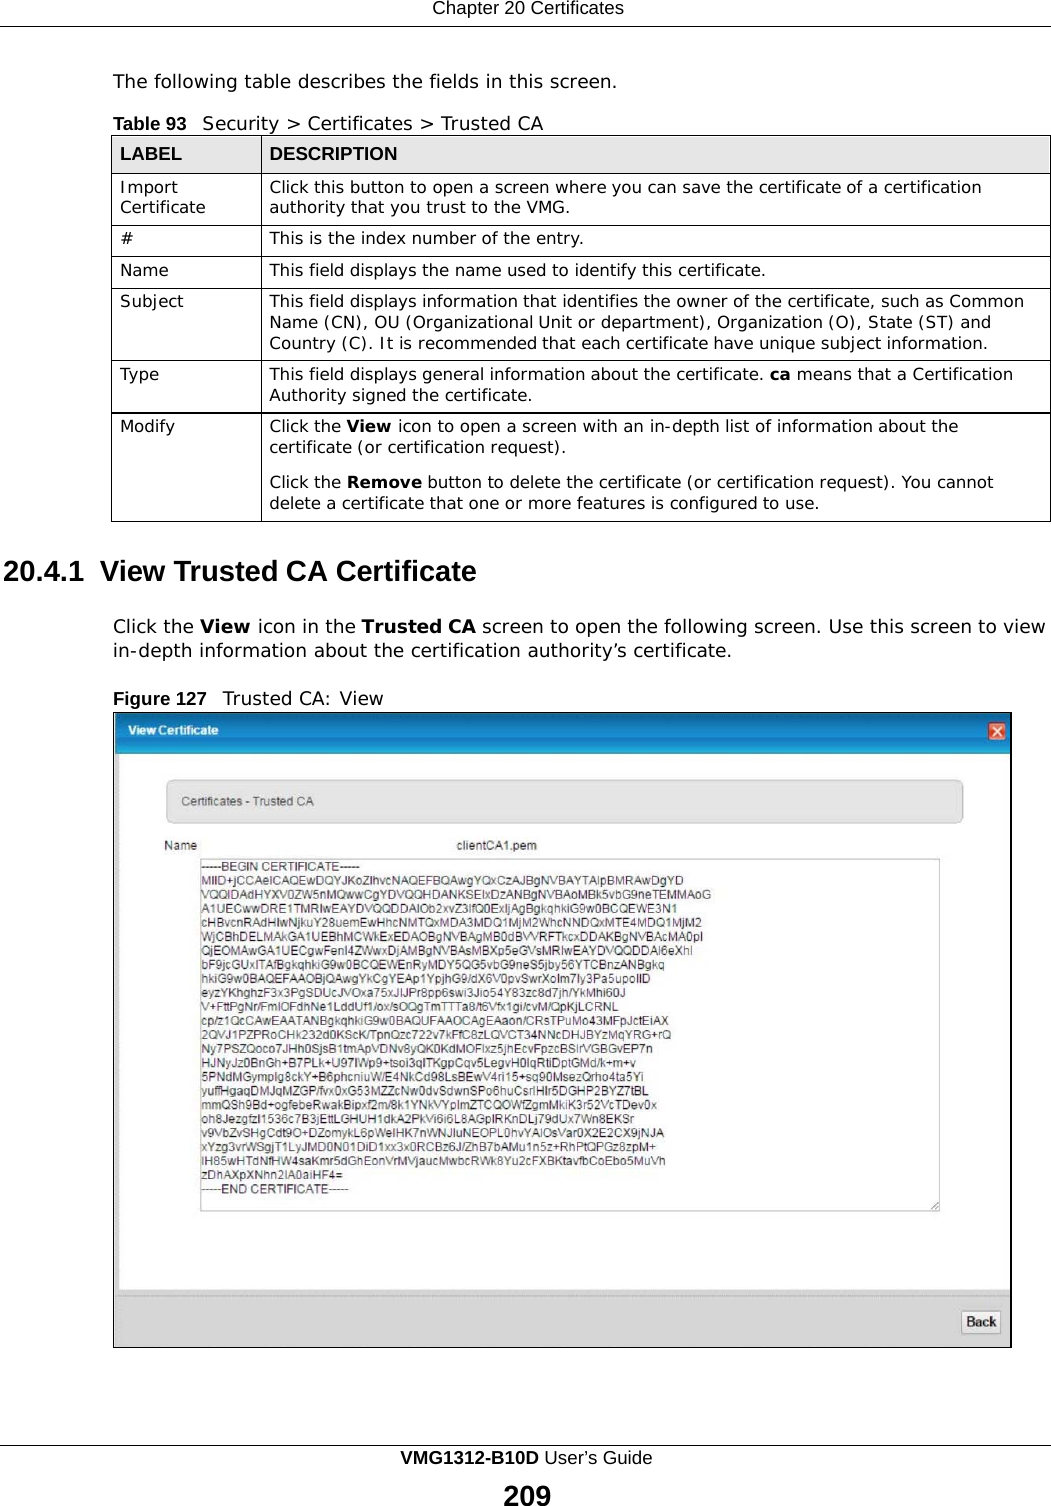 Chapter 20 Certificates      The following table describes the fields in this screen.  Table 93   Security &gt; Certificates &gt; Trusted CA  LABEL DESCRIPTION Import Certificate Click this button to open a screen where you can save the certificate of a certification authority that you trust to the VMG. # This is the index number of the entry. Name This field displays the name used to identify this certificate. Subject This field displays information that identifies the owner of the certificate, such as Common Name (CN), OU (Organizational Unit or department), Organization (O), State (ST) and Country (C). It is recommended that each certificate have unique subject information. Type This field displays general information about the certificate. ca means that a Certification Authority signed the certificate. Modify Click the View icon to open a screen with an in-depth list of information about the certificate (or certification request).  Click the Remove button to delete the certificate (or certification request). You cannot delete a certificate that one or more features is configured to use.  20.4.1  View Trusted CA Certificate  Click the View icon in the Trusted CA screen to open the following screen. Use this screen to view in-depth information about the certification authority’s certificate.  Figure 127   Trusted CA: View VMG1312-B10D User’s Guide 209  